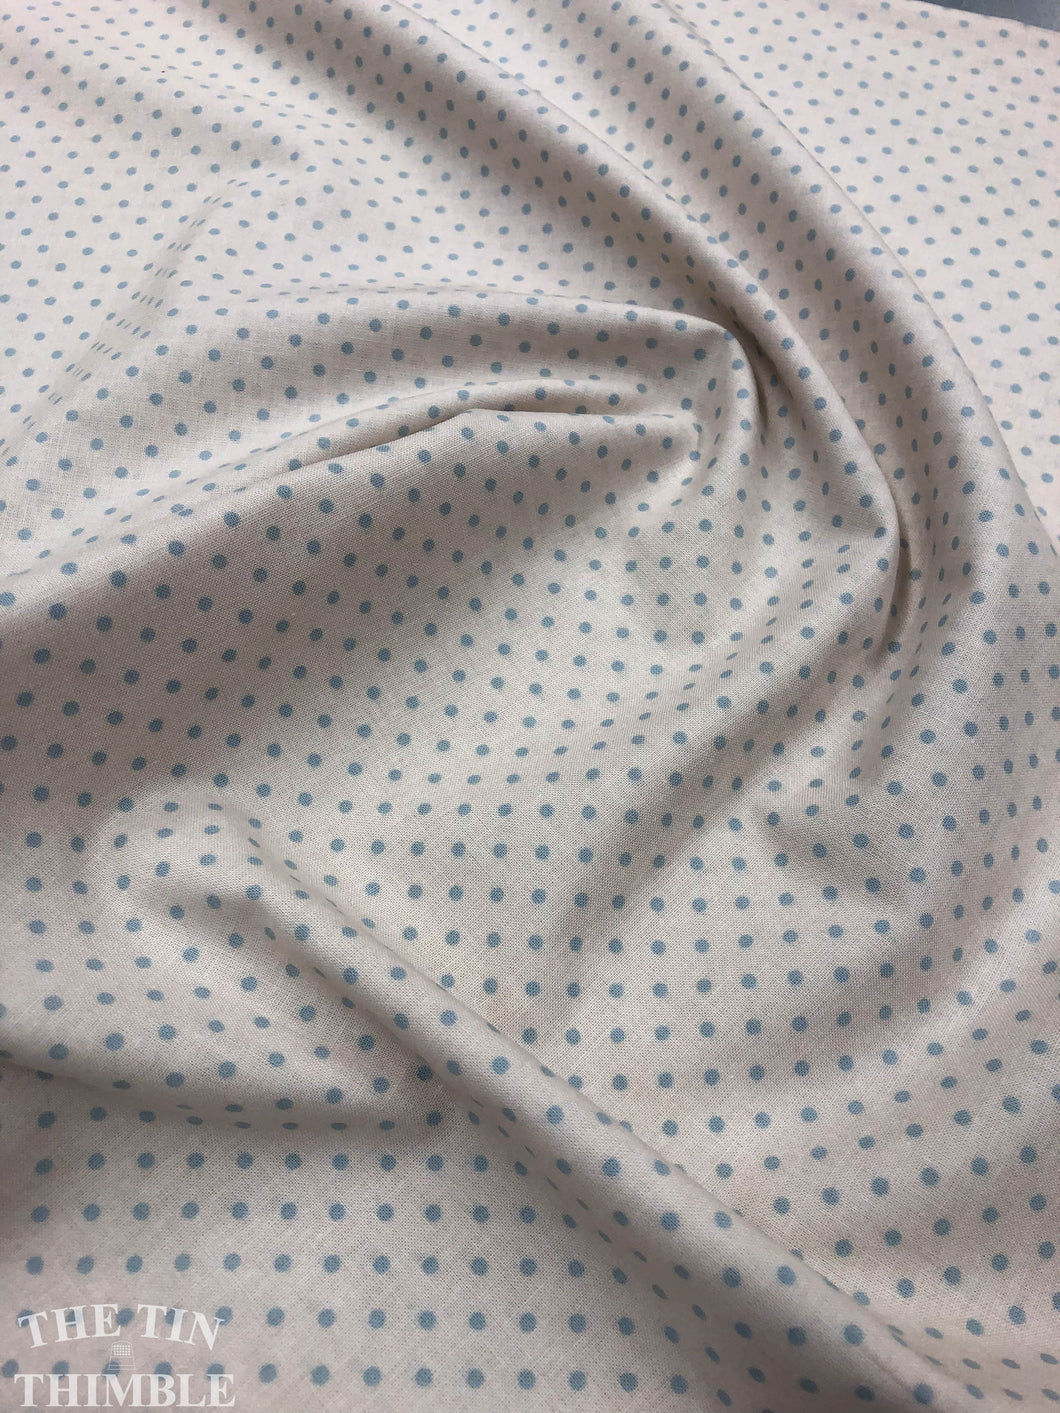 Cotton Fabric / American Country / Blue Polka Dot / Lecien - 1 Yard - Cotton Fabric / Made in Japan / Country Print Fabric / Blue Off White